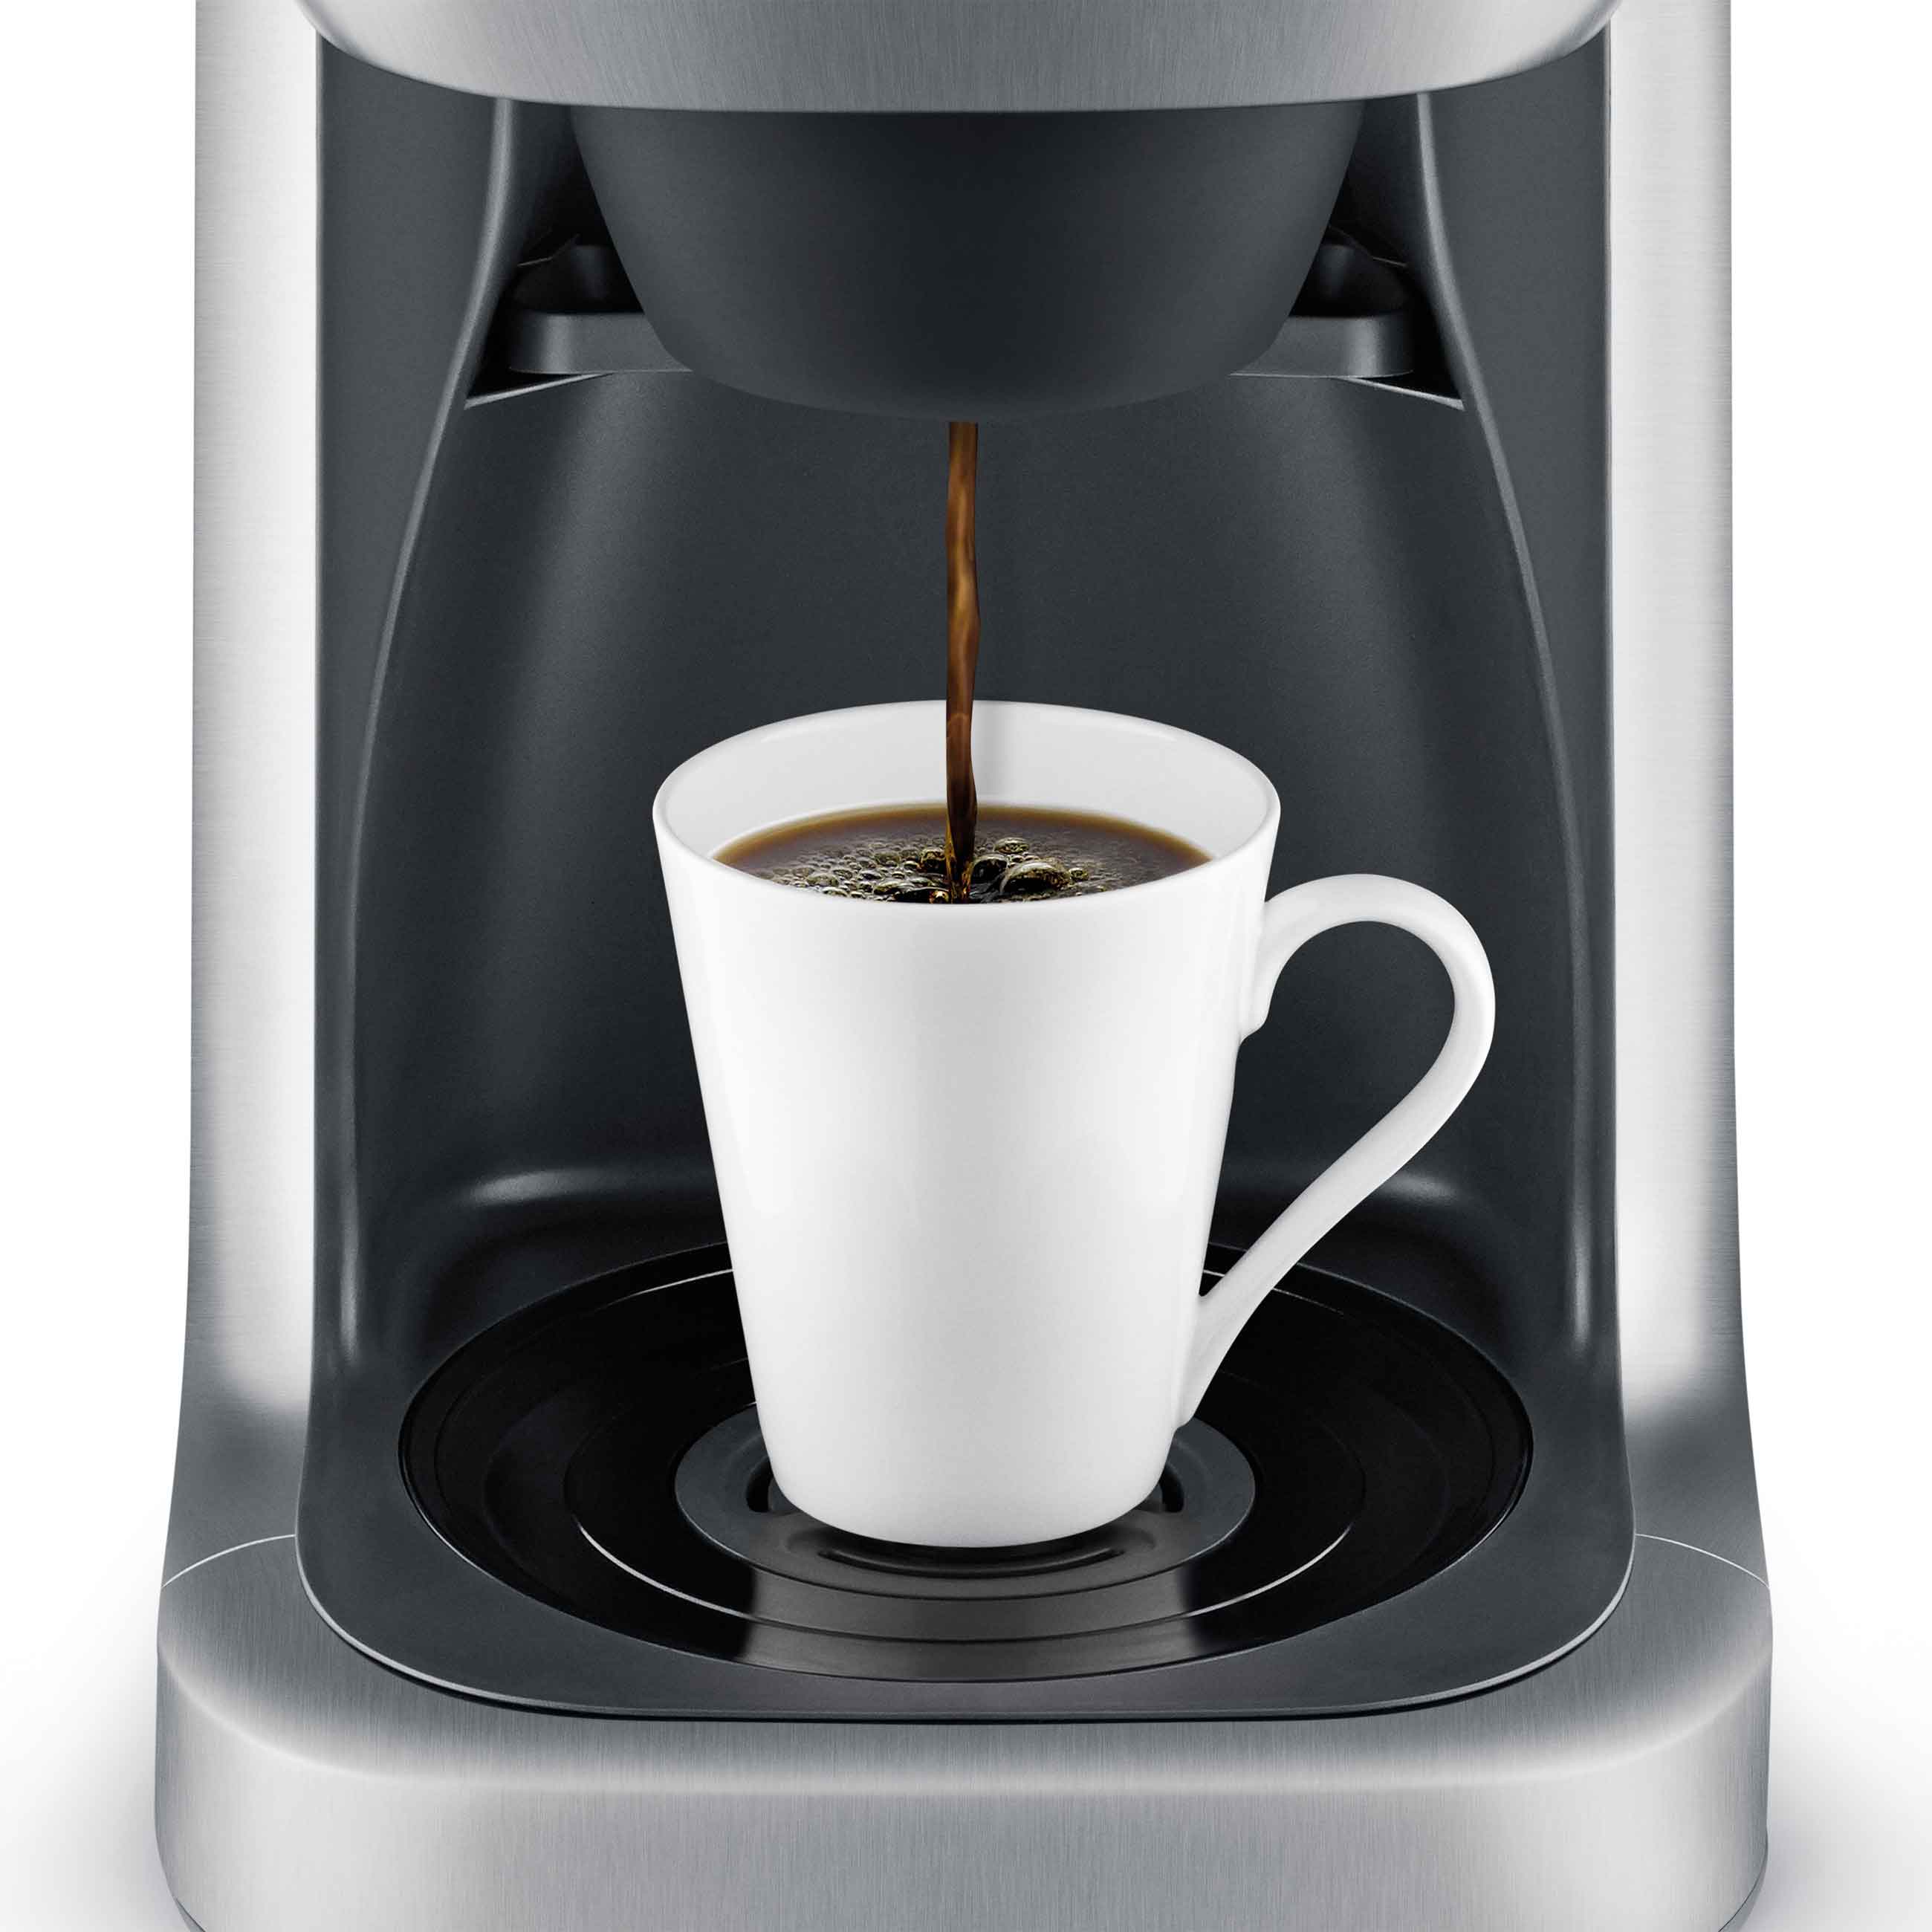 Breville Grind Control Coffee Maker – The Happy Cook